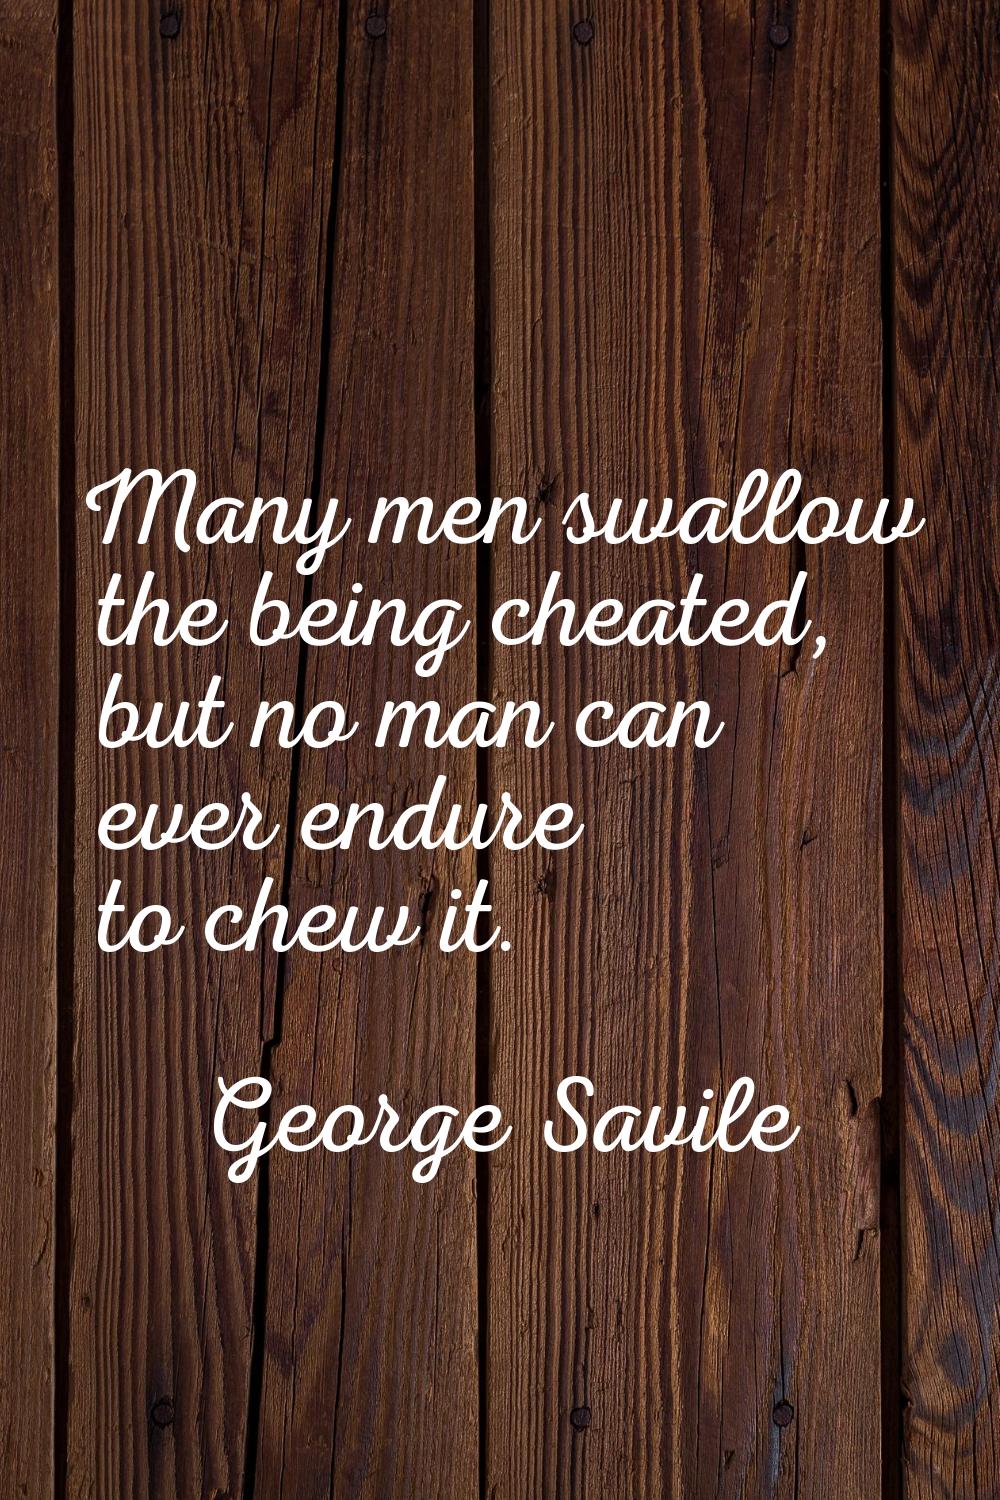 Many men swallow the being cheated, but no man can ever endure to chew it.